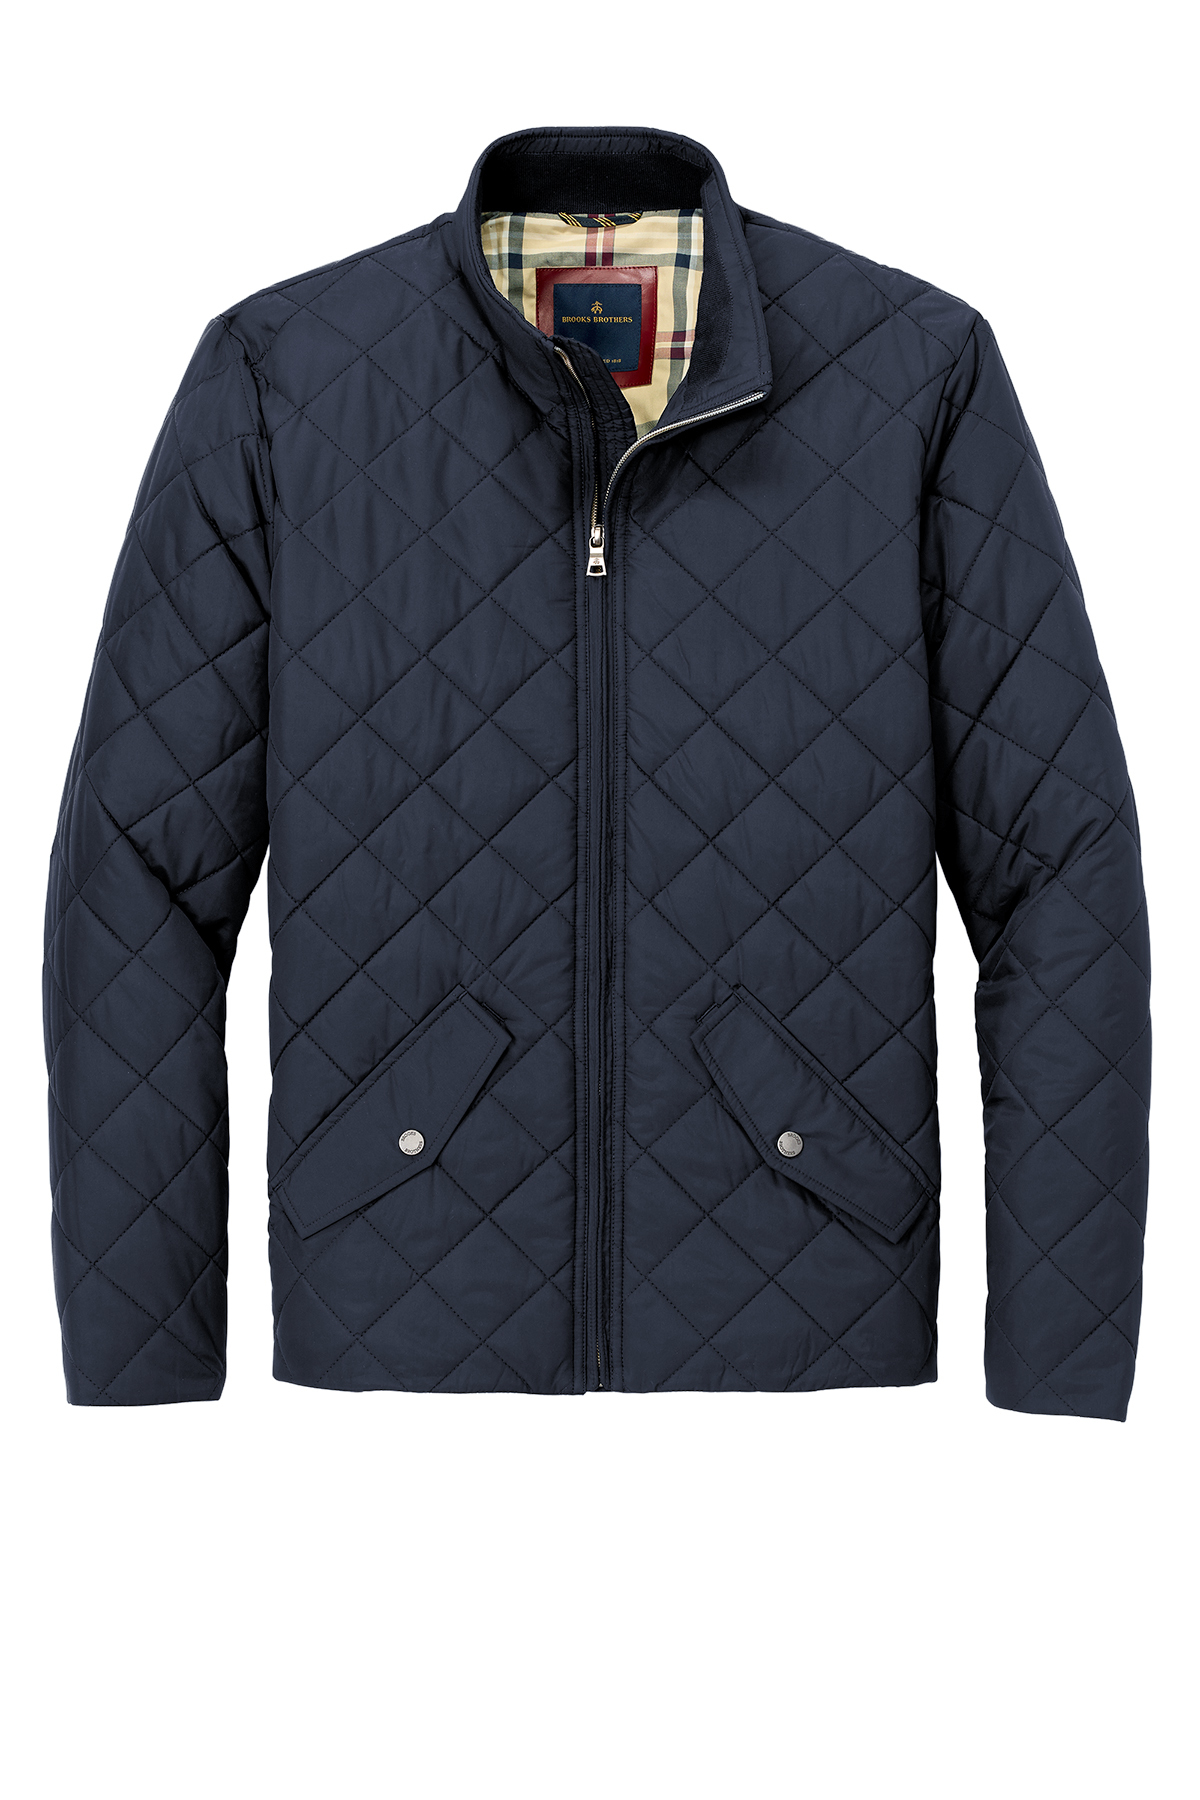 Brooks Brothers Quilted Jacket | Product | Company Casuals